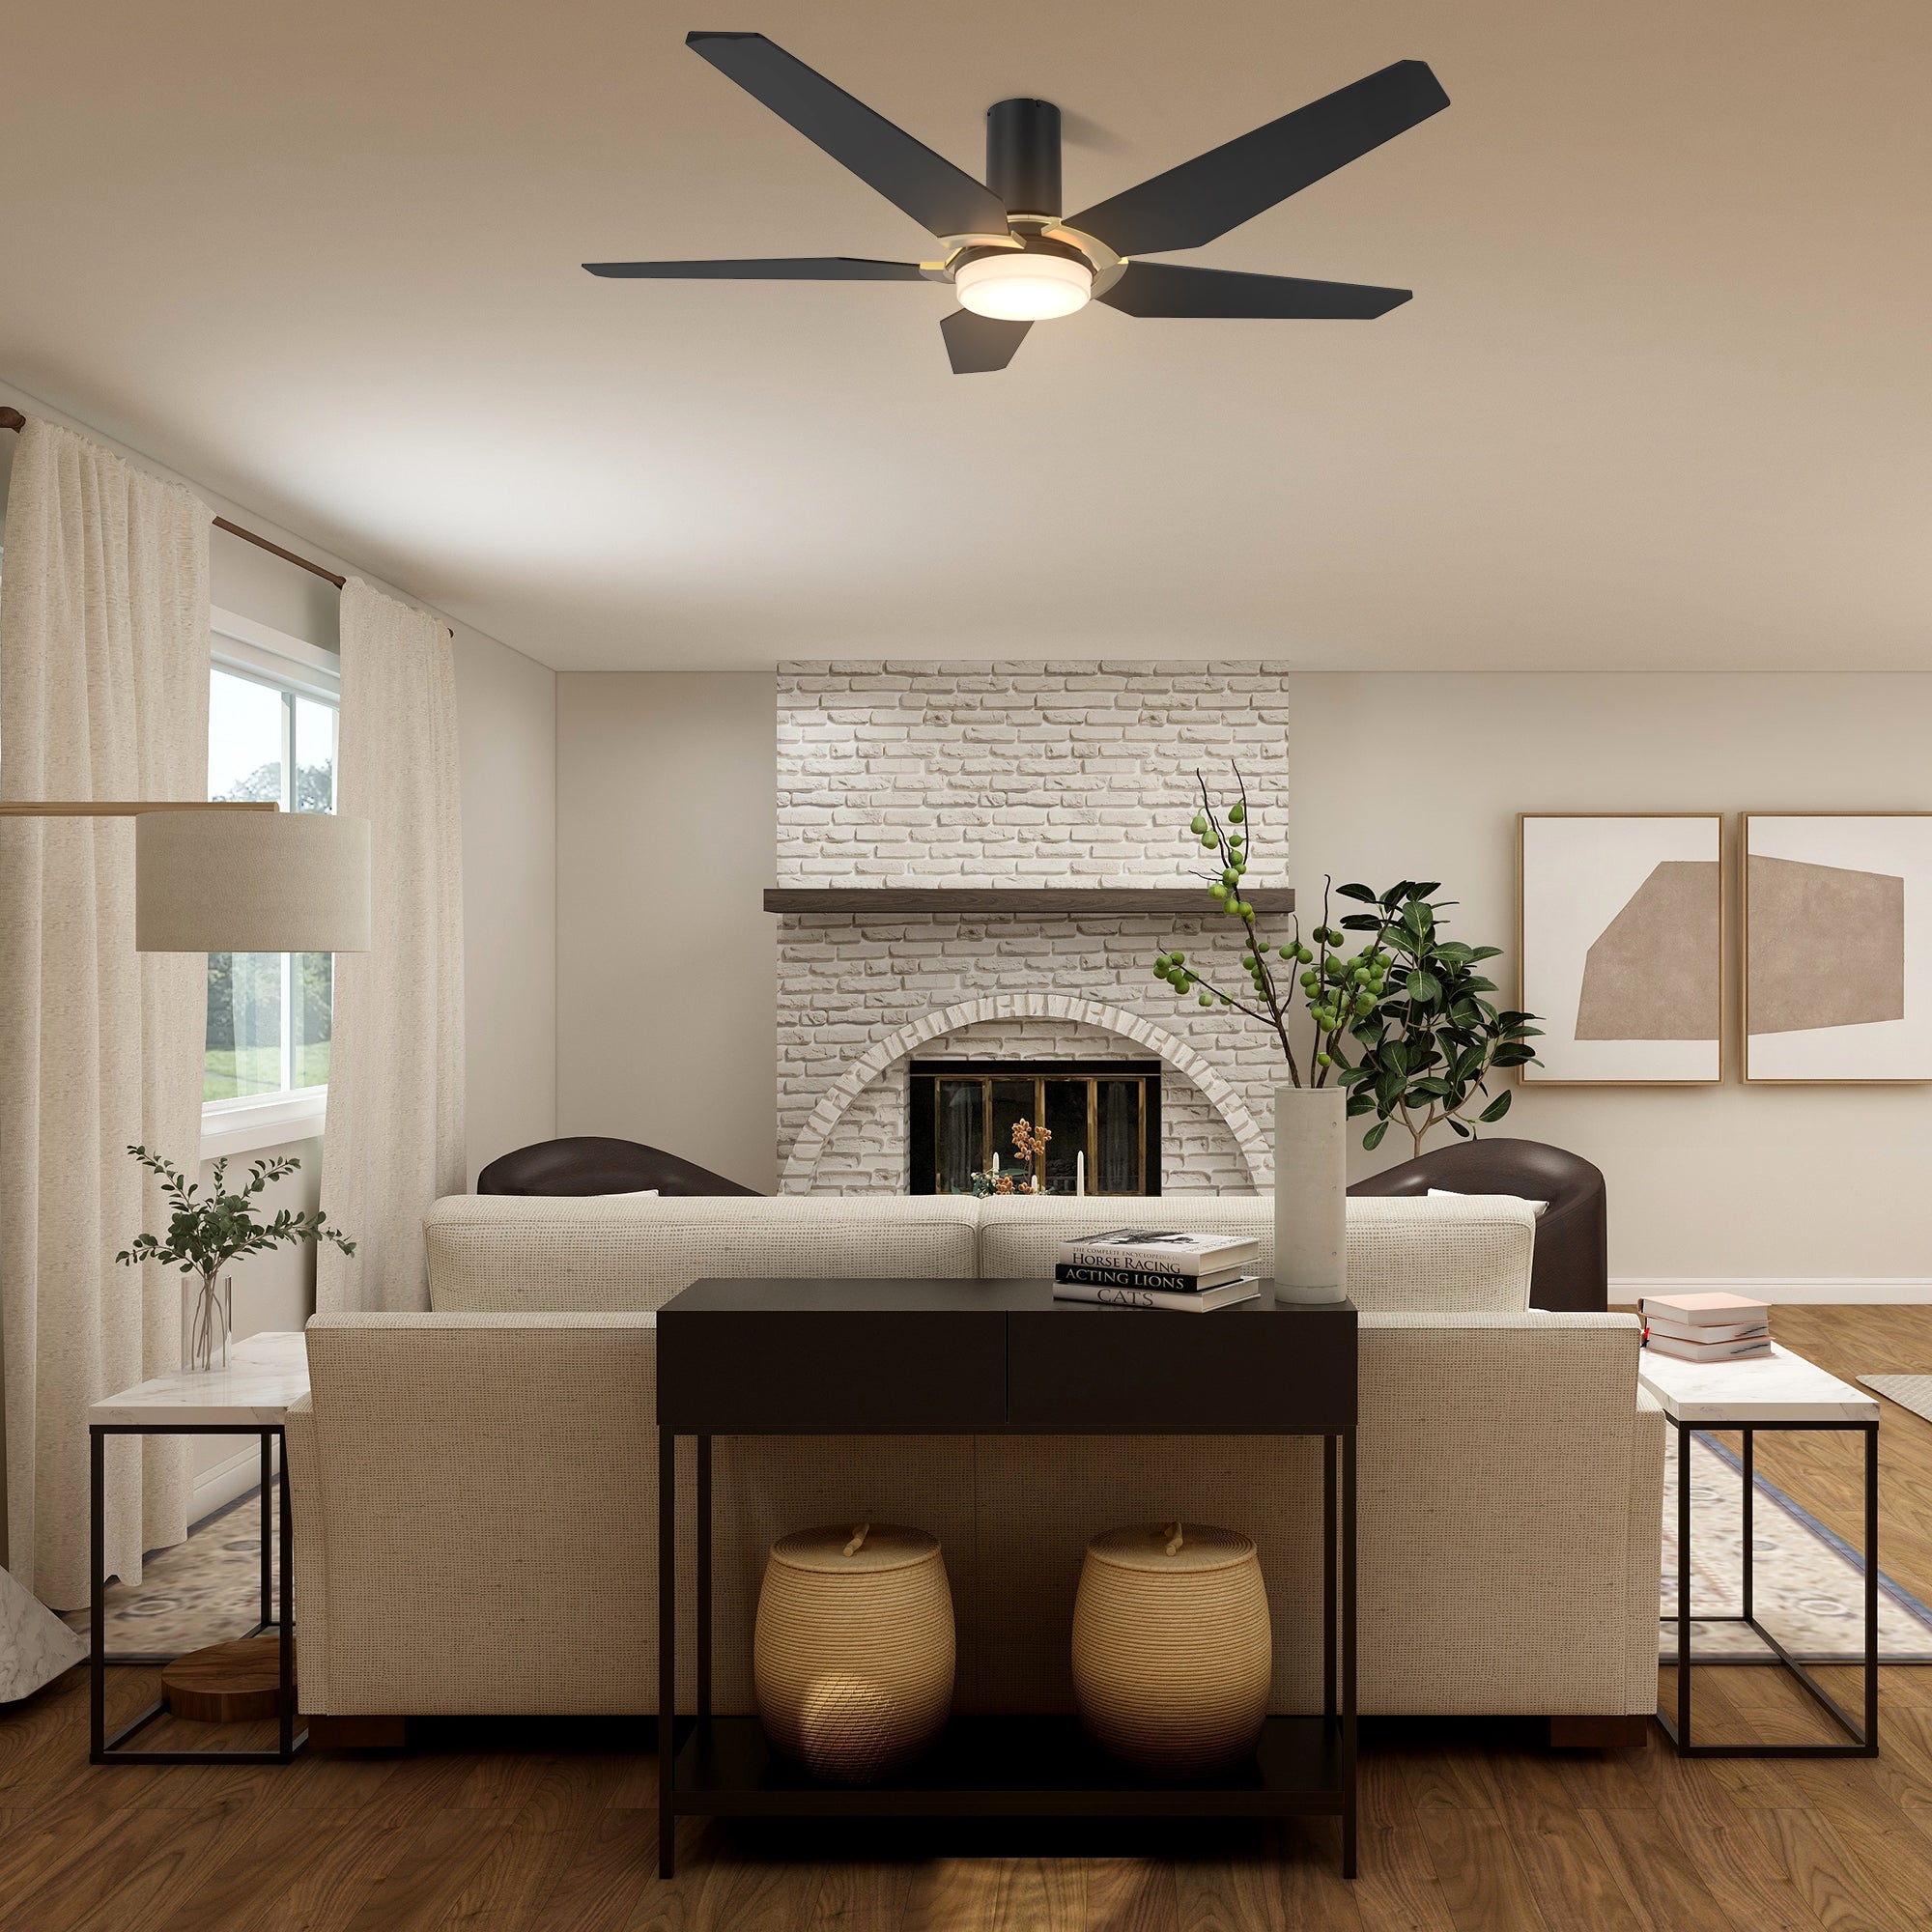 This Voyager 52&#39;&#39; smart ceiling fan keeps your space cool, bright, and stylish. It is a soft modern masterpiece perfect for your large indoor living spaces. This Wifi smart ceiling fan is a simplicity designing with Black finish, use elegant Plywood blades, Glass shade and has an integrated 4000K LED daylight. The fan features Remote control, Wi-Fi apps, Siri Shortcut and Voice control technology (compatible with Amazon Alexa and Google Home Assistant ) to set fan preferences.